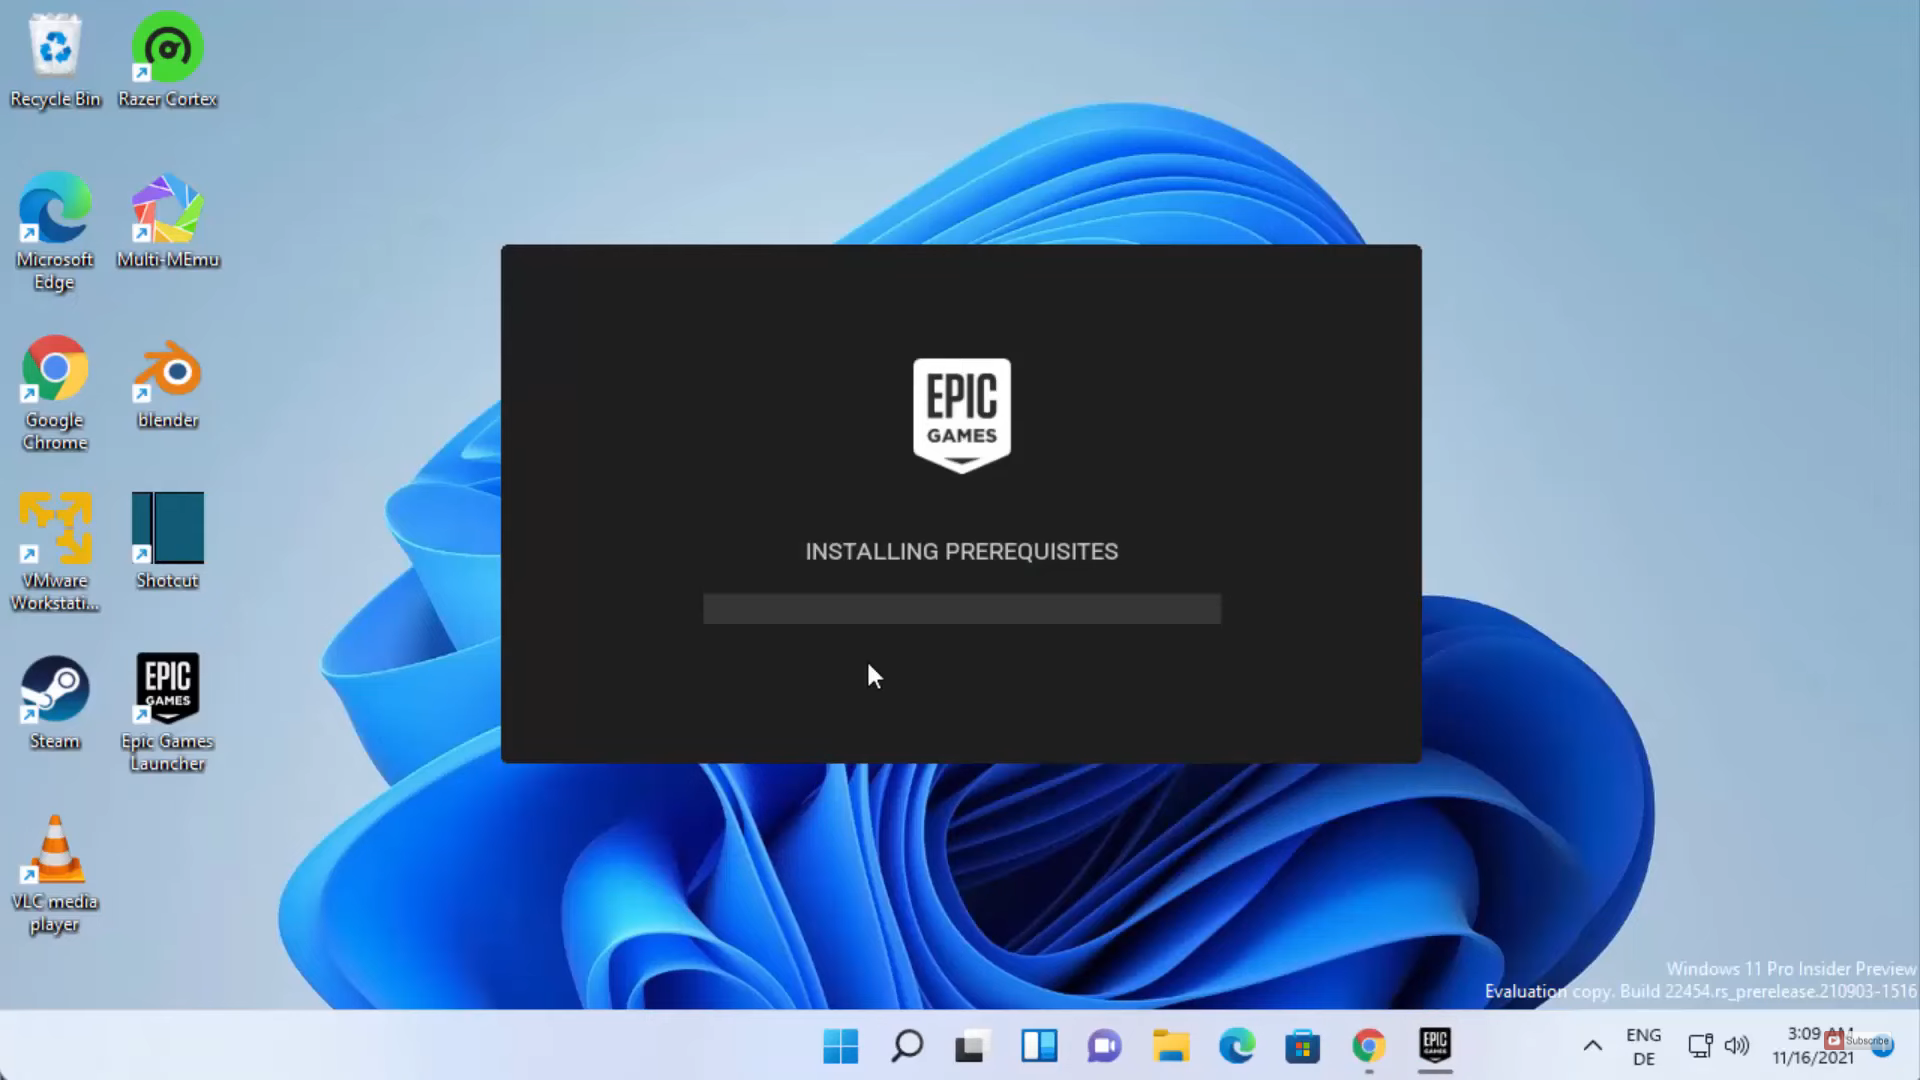 Epic Games on Linux: A Comprehensive Guide to the Launcher